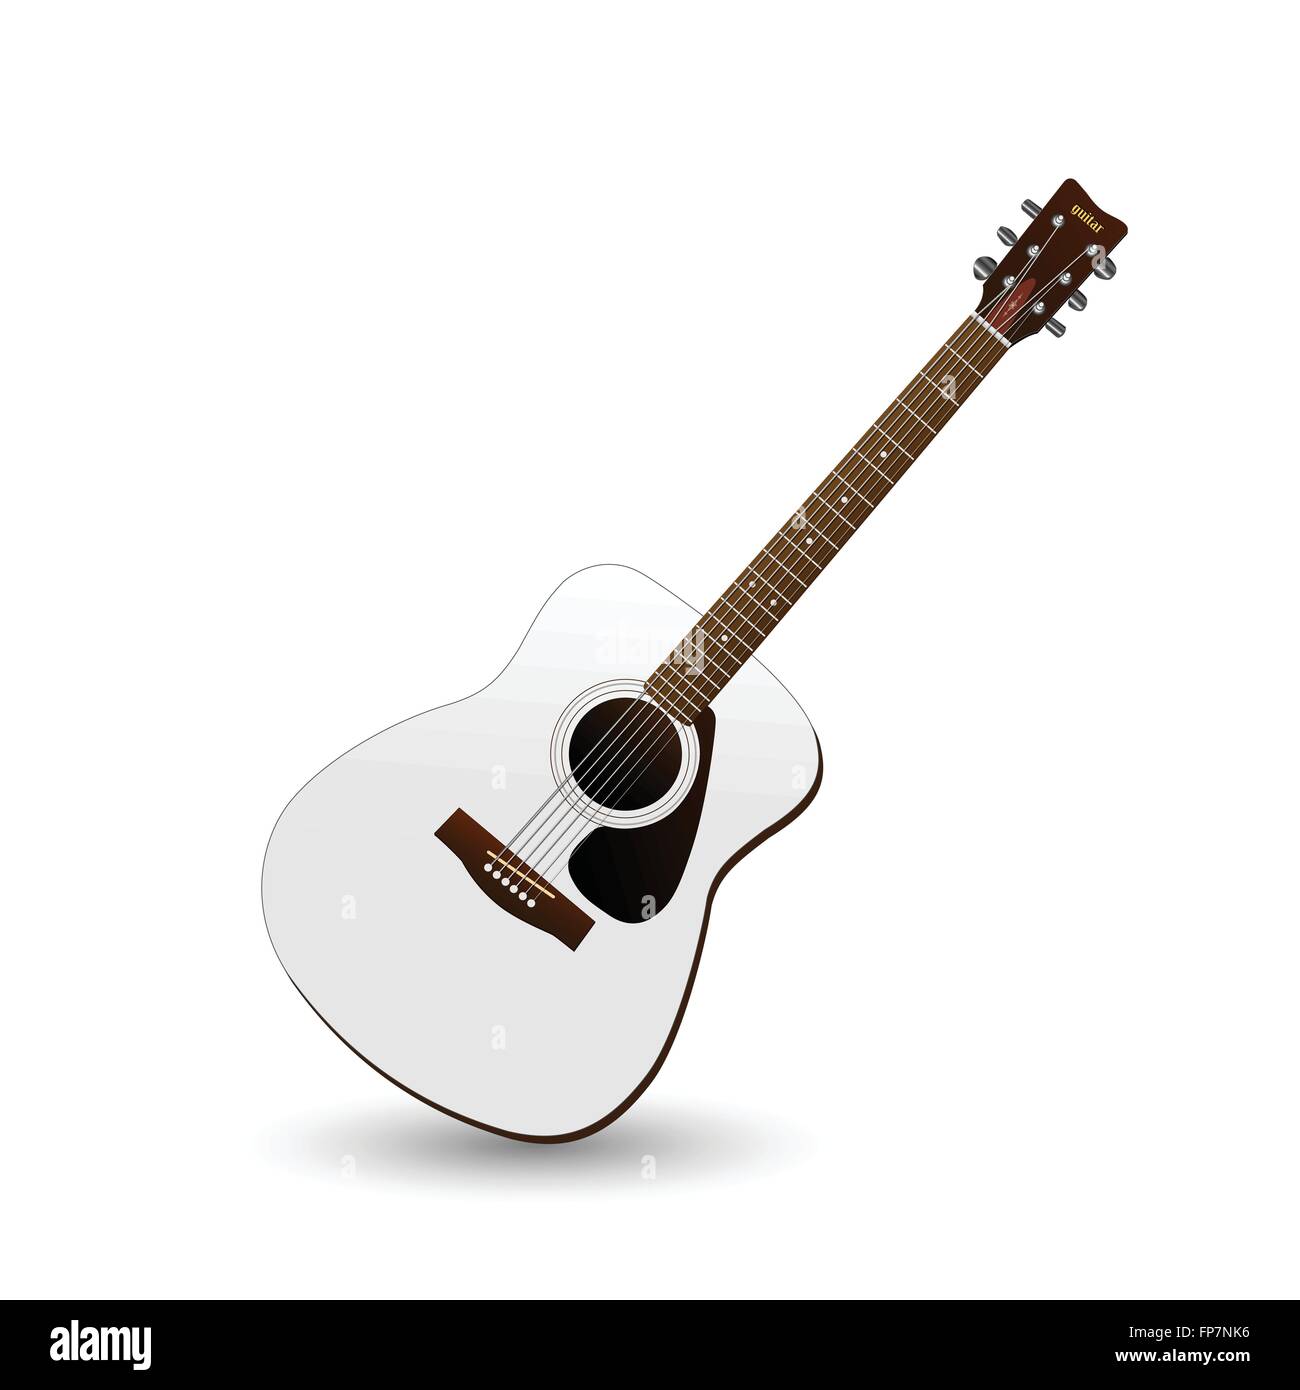 Image of guitar isolated on a white background. Stock Vector